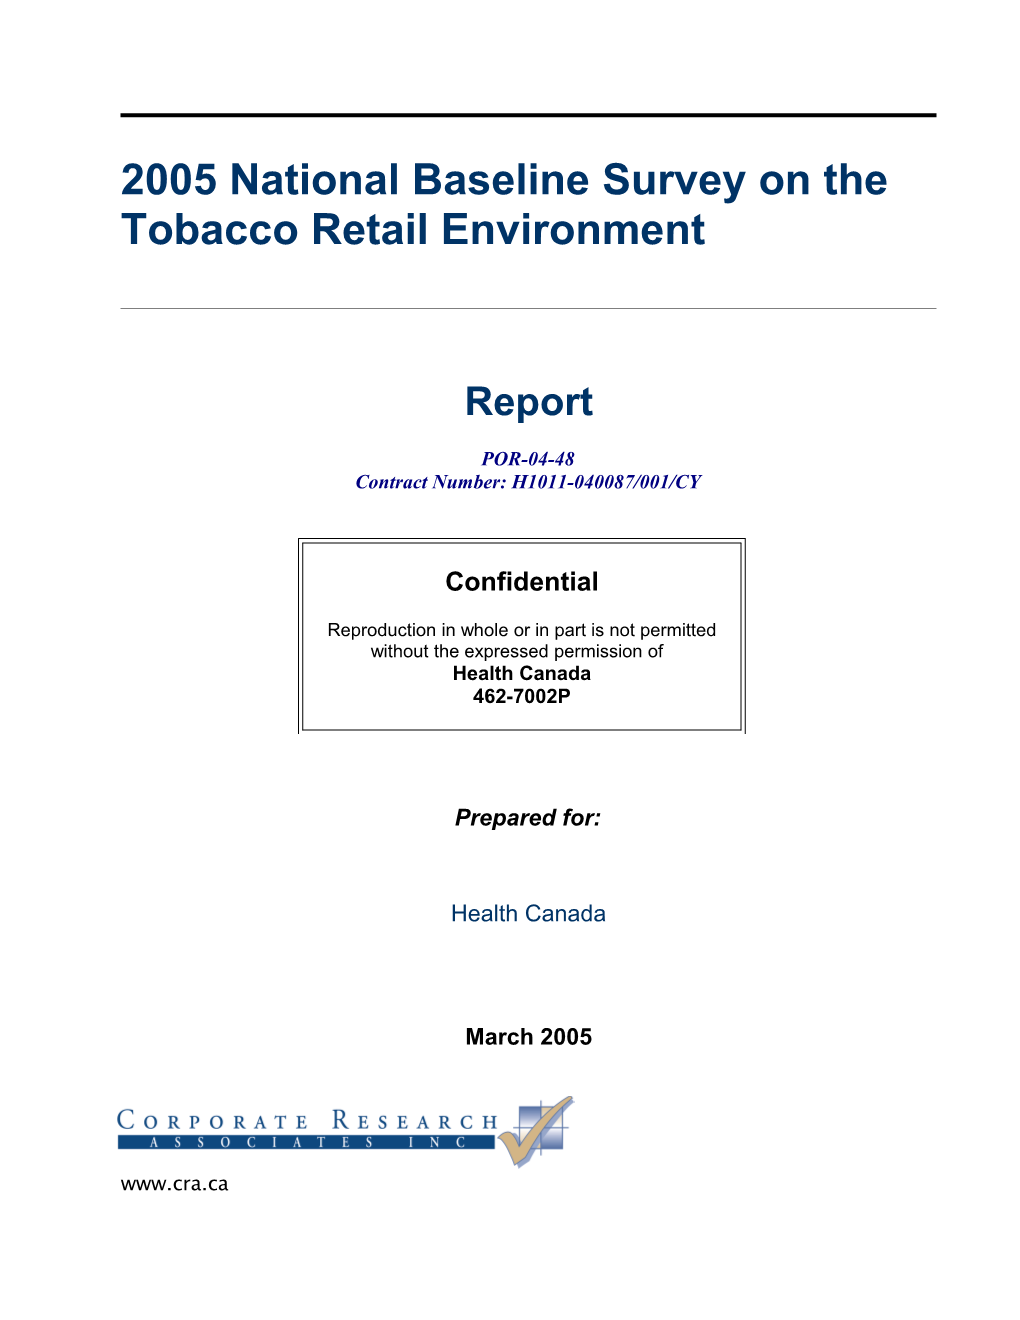 2005 National Baseline Survey on the Tobacco Retail Environment